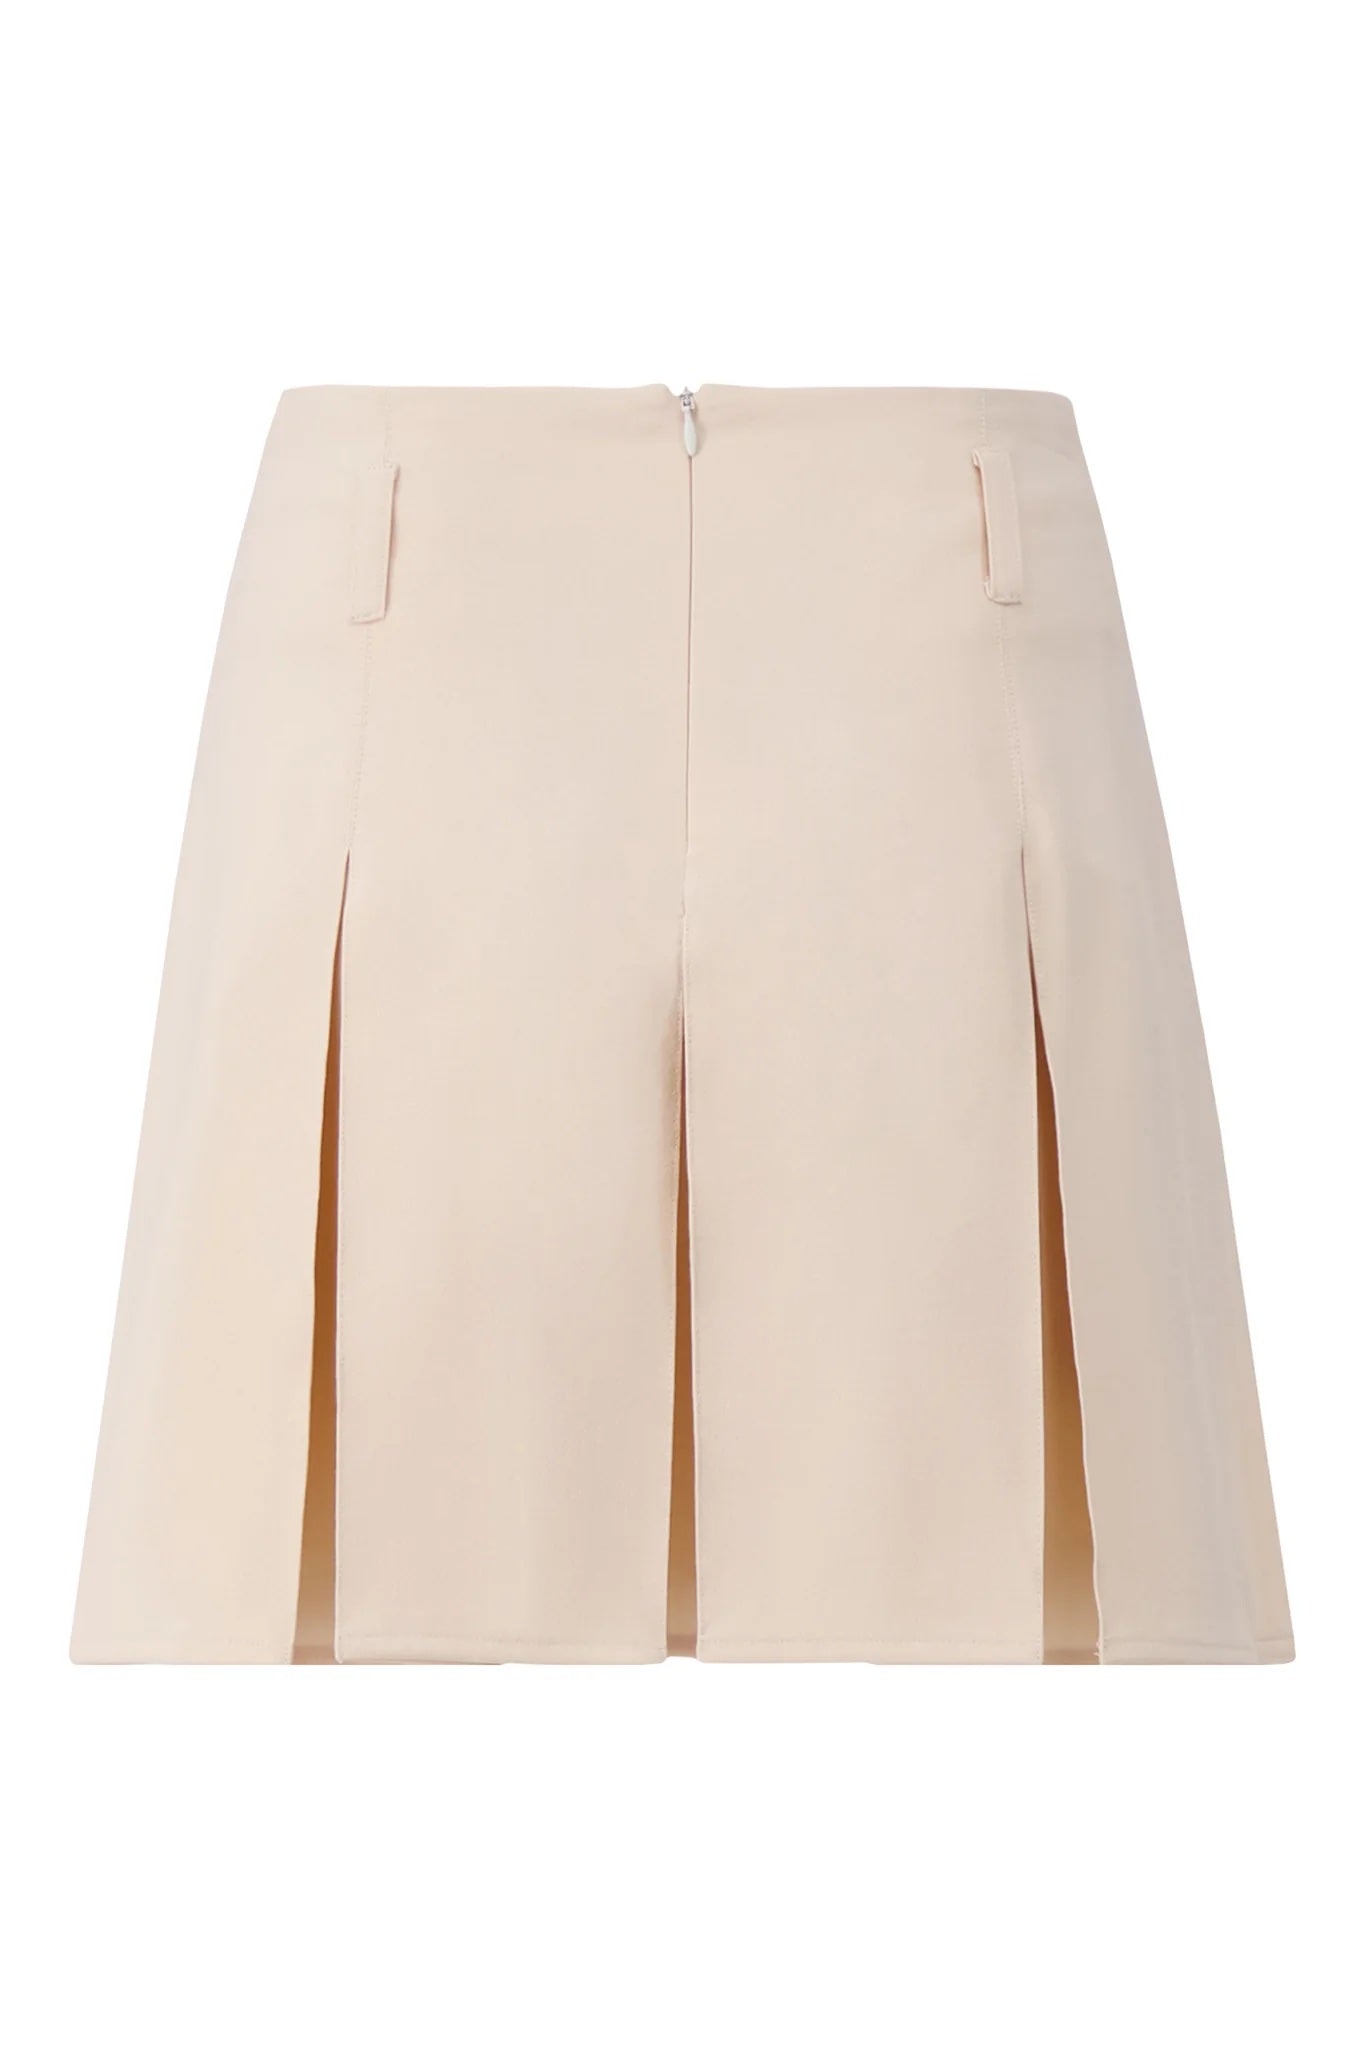 BEAUFILLE Konno Mini Skirt in Parchment